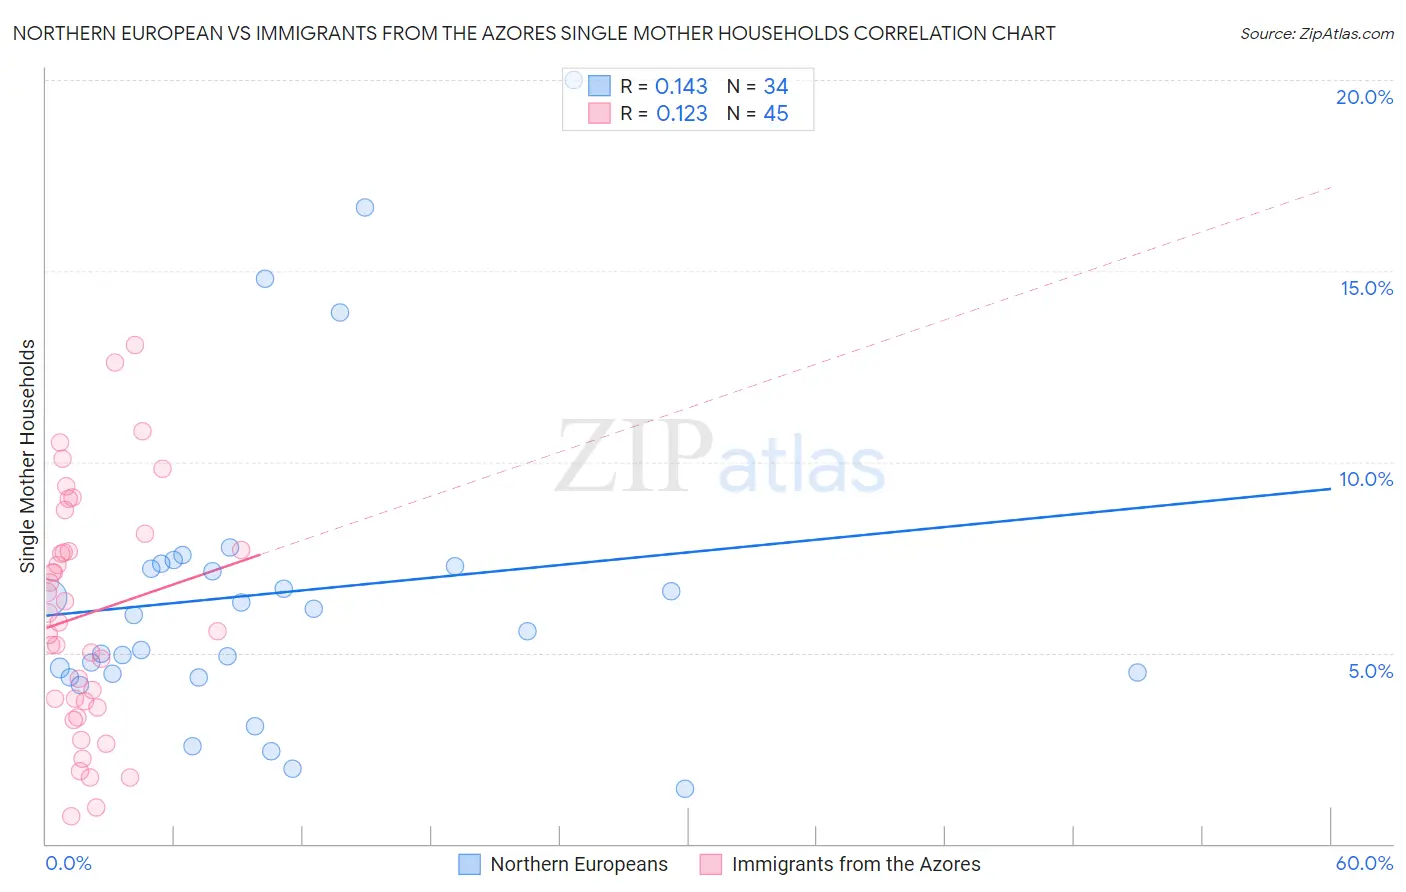 Northern European vs Immigrants from the Azores Single Mother Households